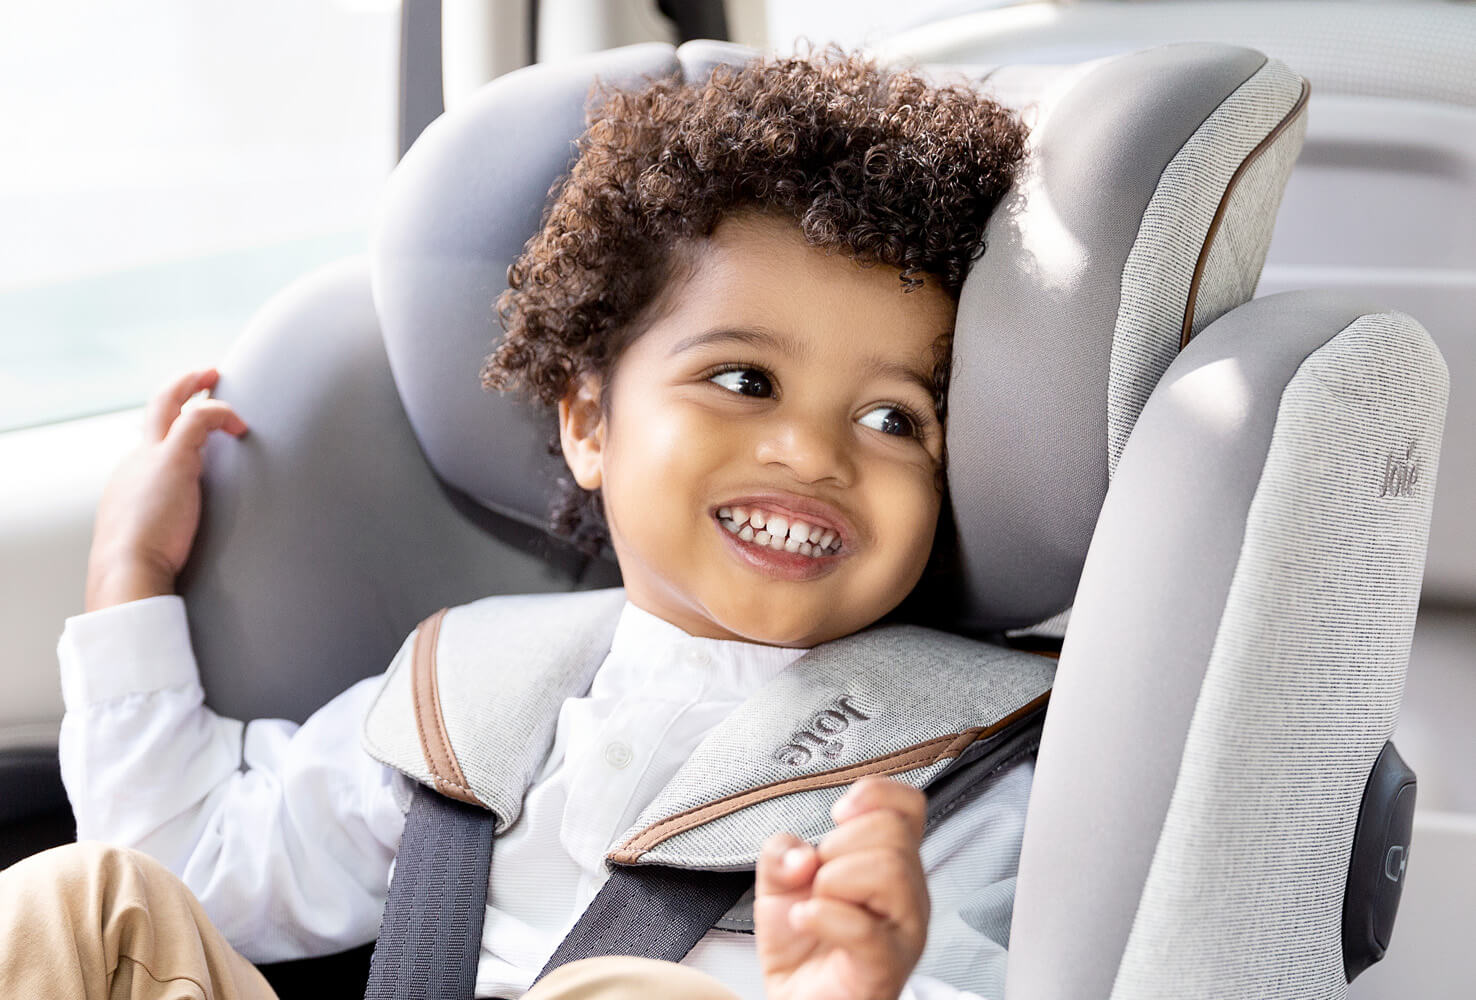  A young boy with curly brown hair seated in a gray Joie I-Quest car seat, smiling at something off camera.